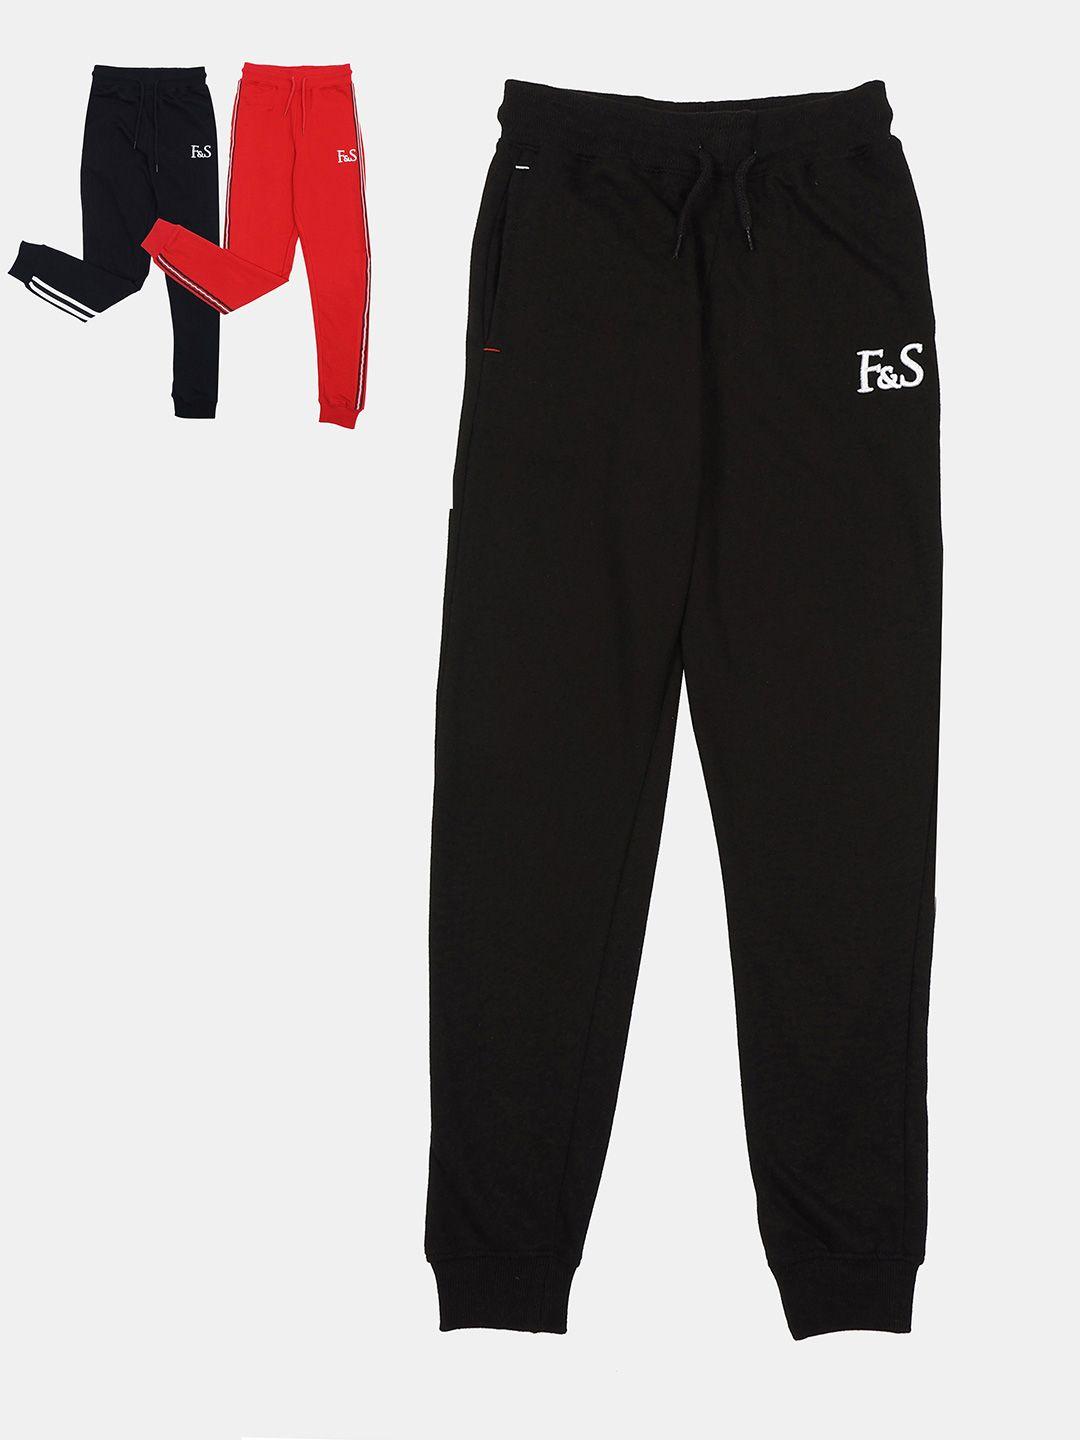 f&s boys pack of 2 mid-rise regular fit joggers